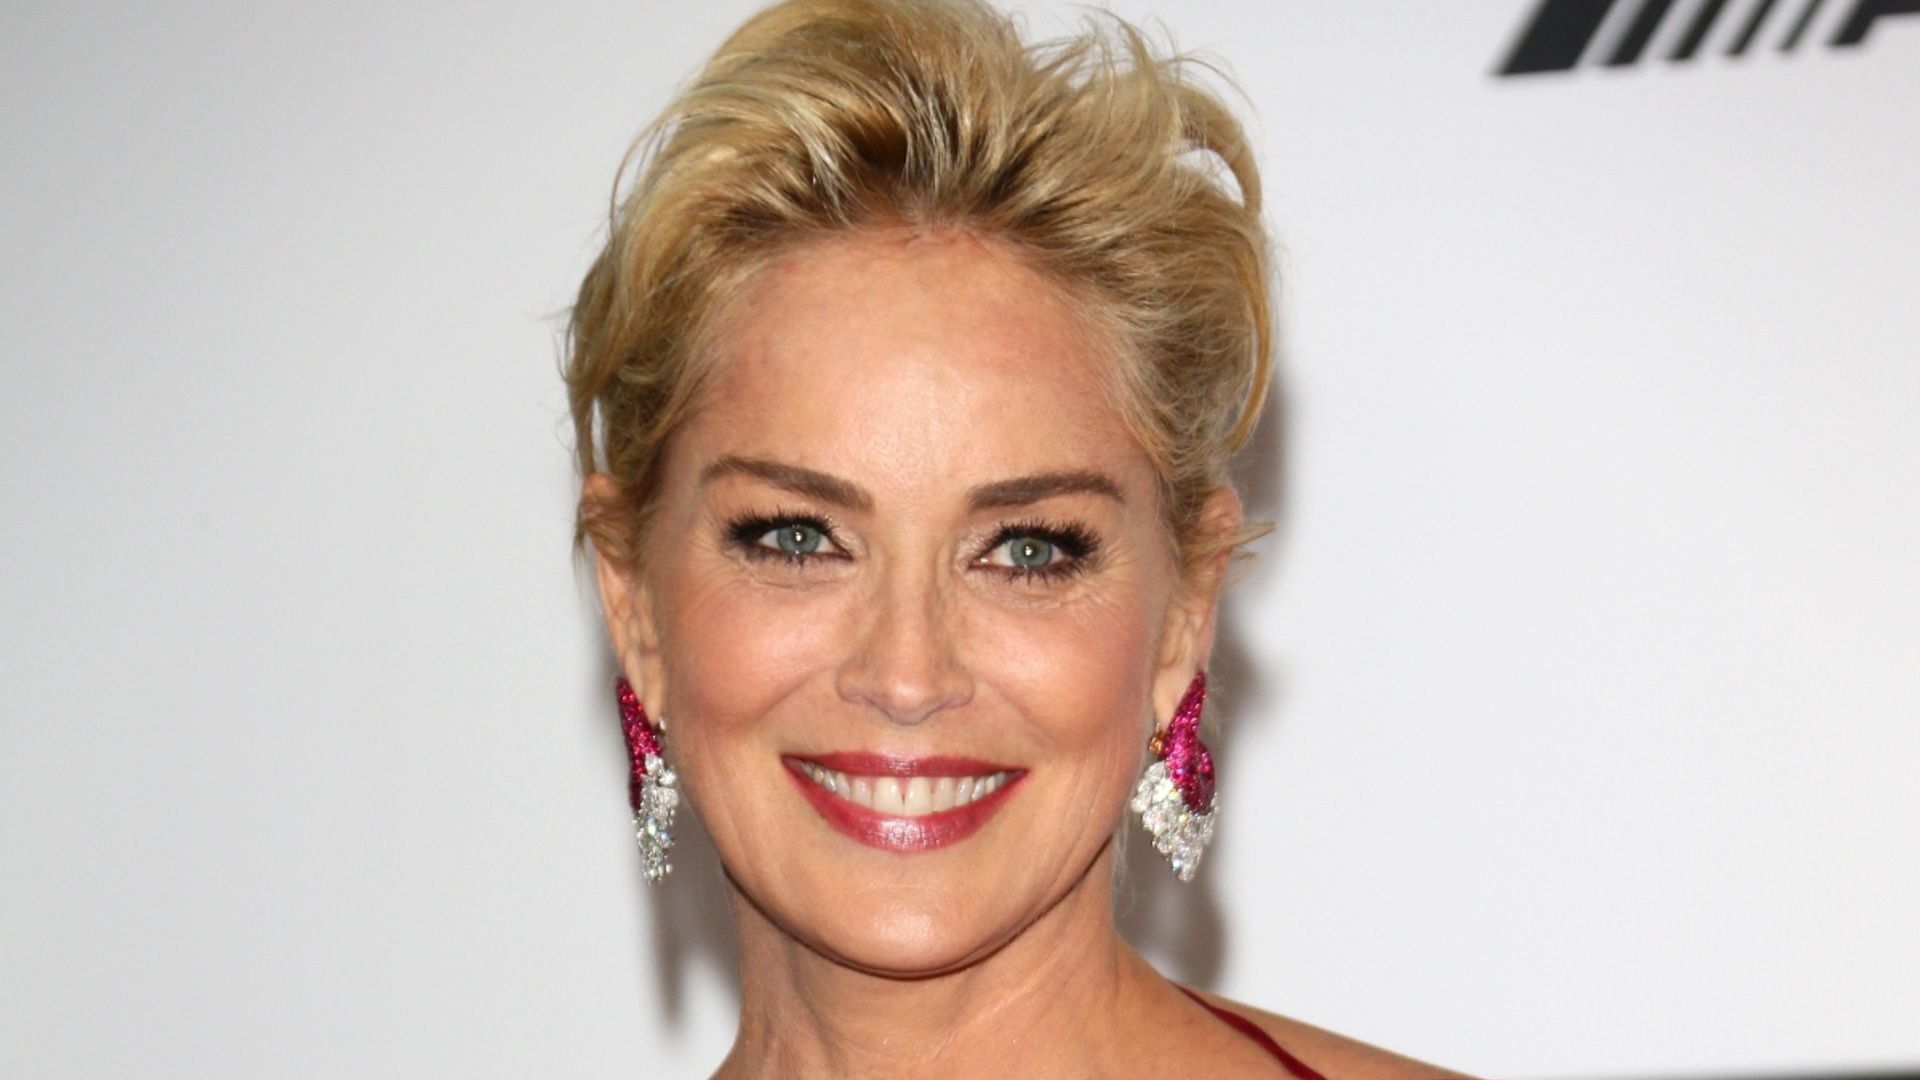 Sharon Stone stuns in a sensational red patterned dress